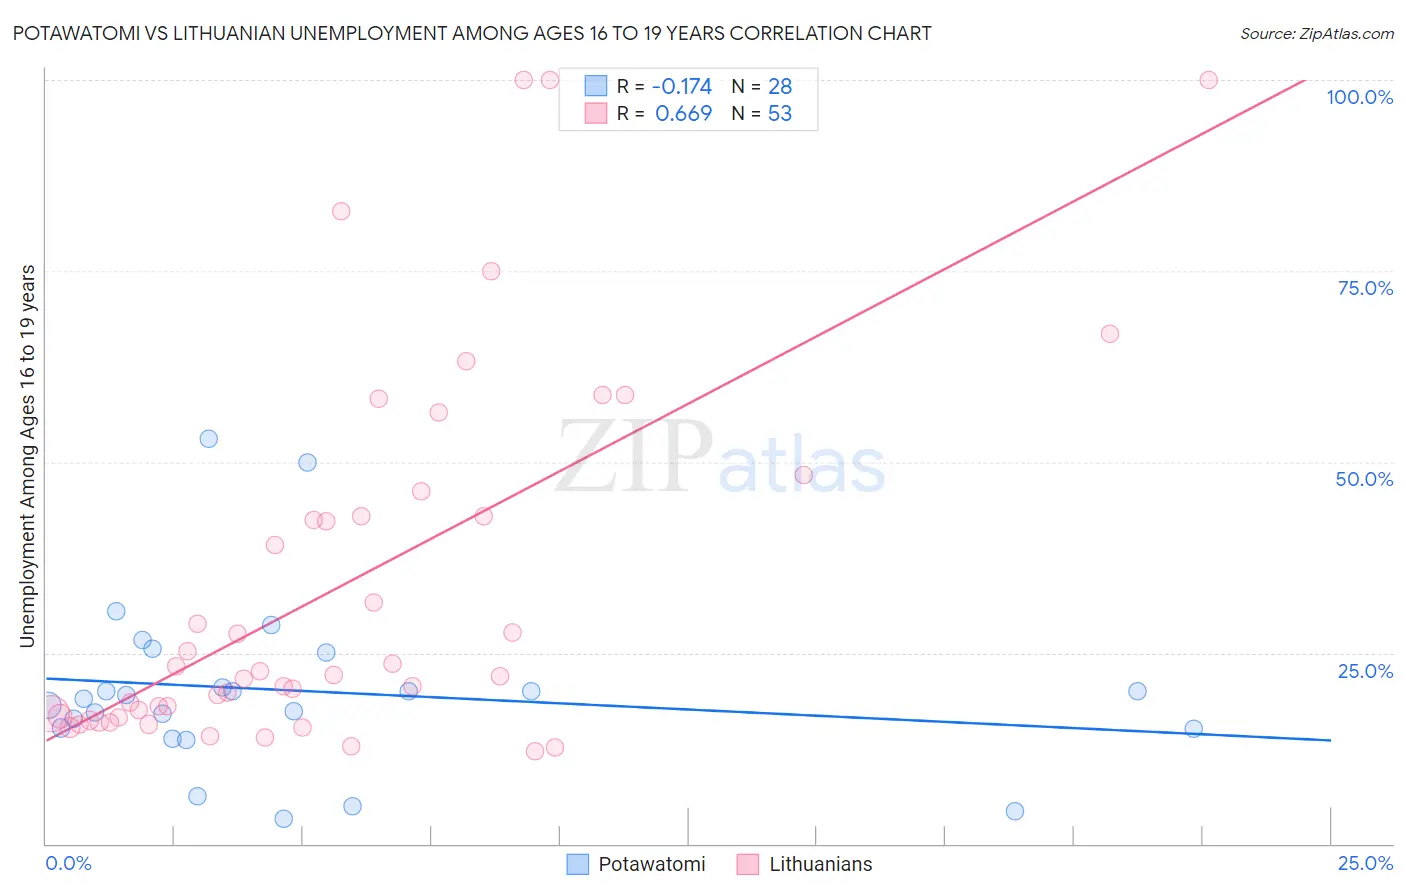 Potawatomi vs Lithuanian Unemployment Among Ages 16 to 19 years